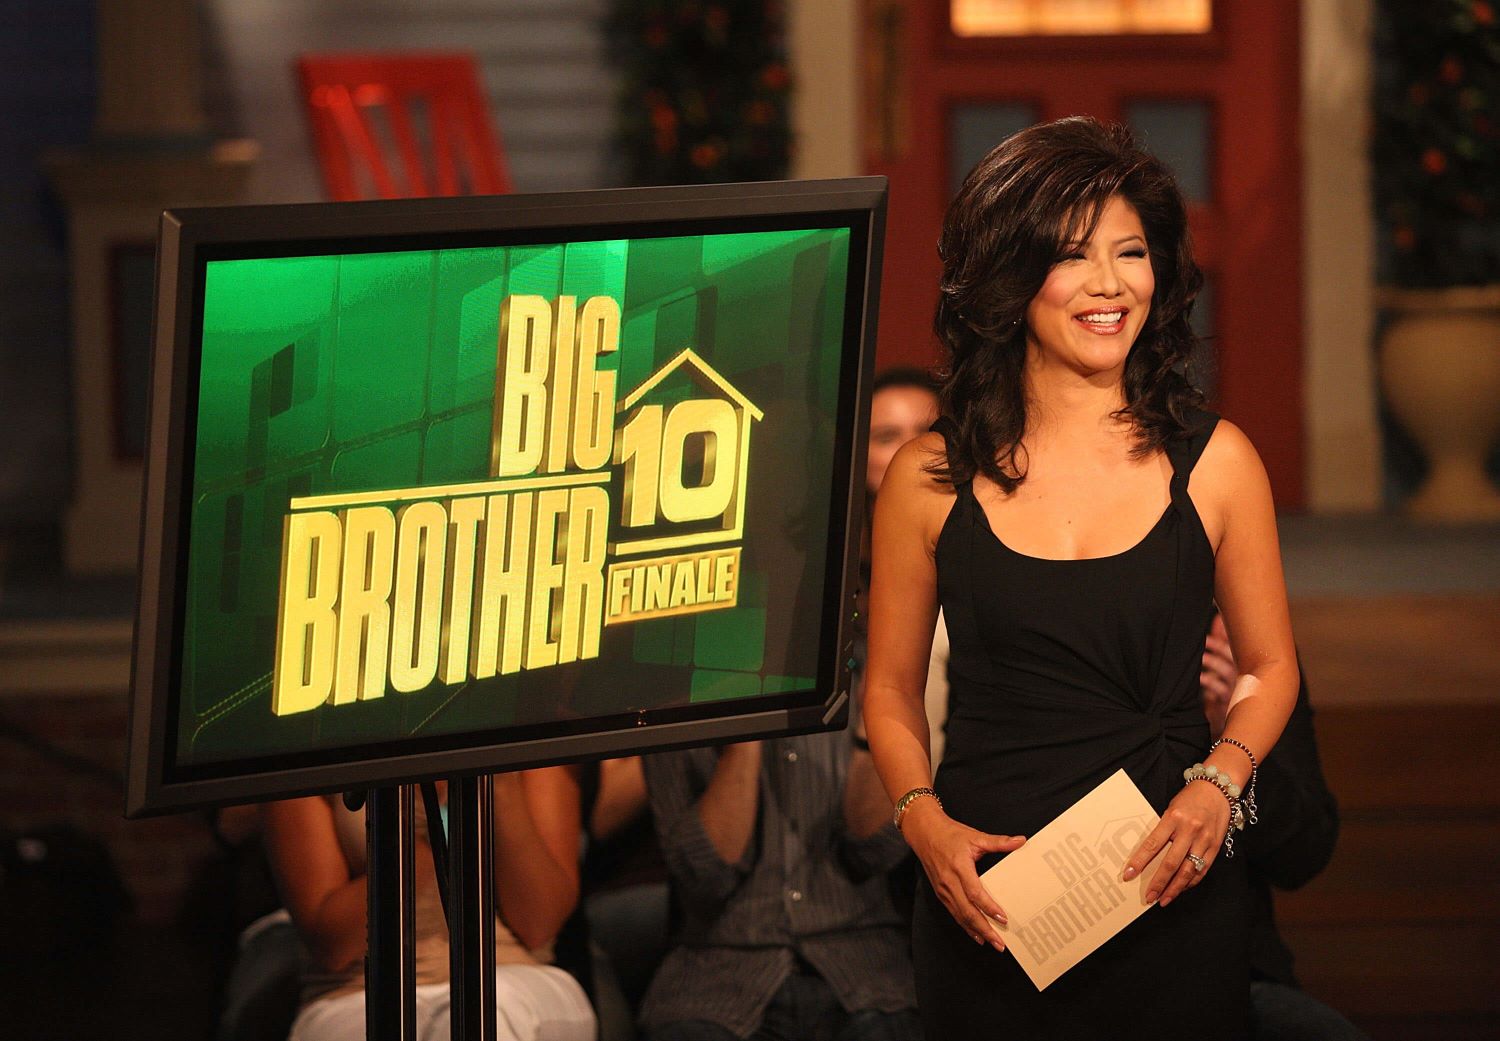 Julie Chen Moonves, the host of 'Big Brother' on CBS, appears during the season 10 finale wearing a black dress.